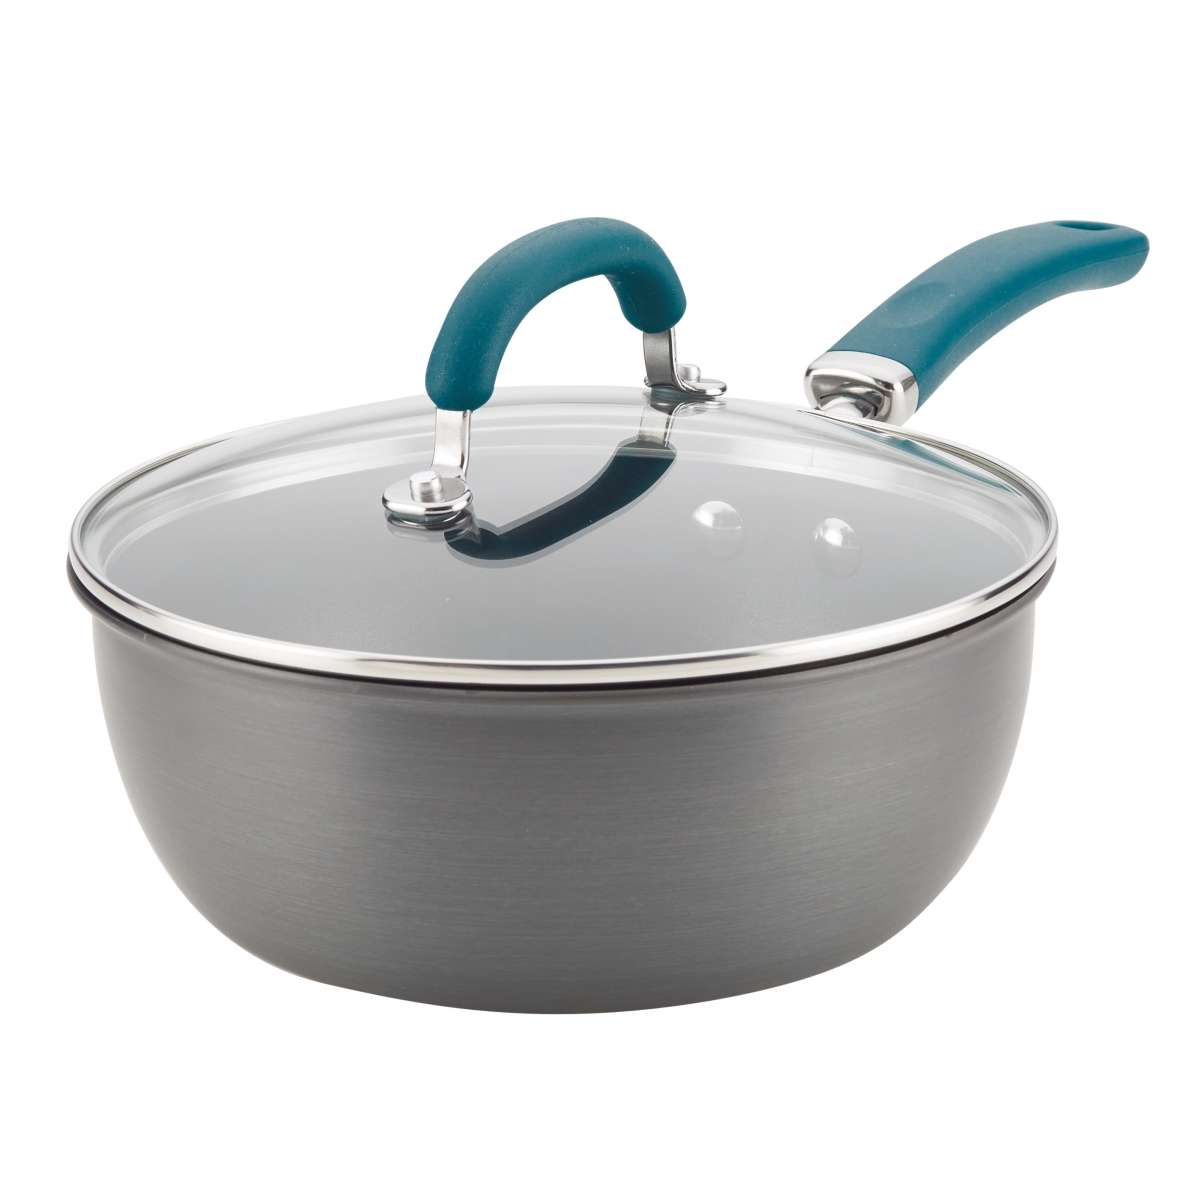 Picture of Rachael Ray 81152 3 qt. Create Delicious Hard Anodized Aluminum Nonstick Everything Pan - Gray